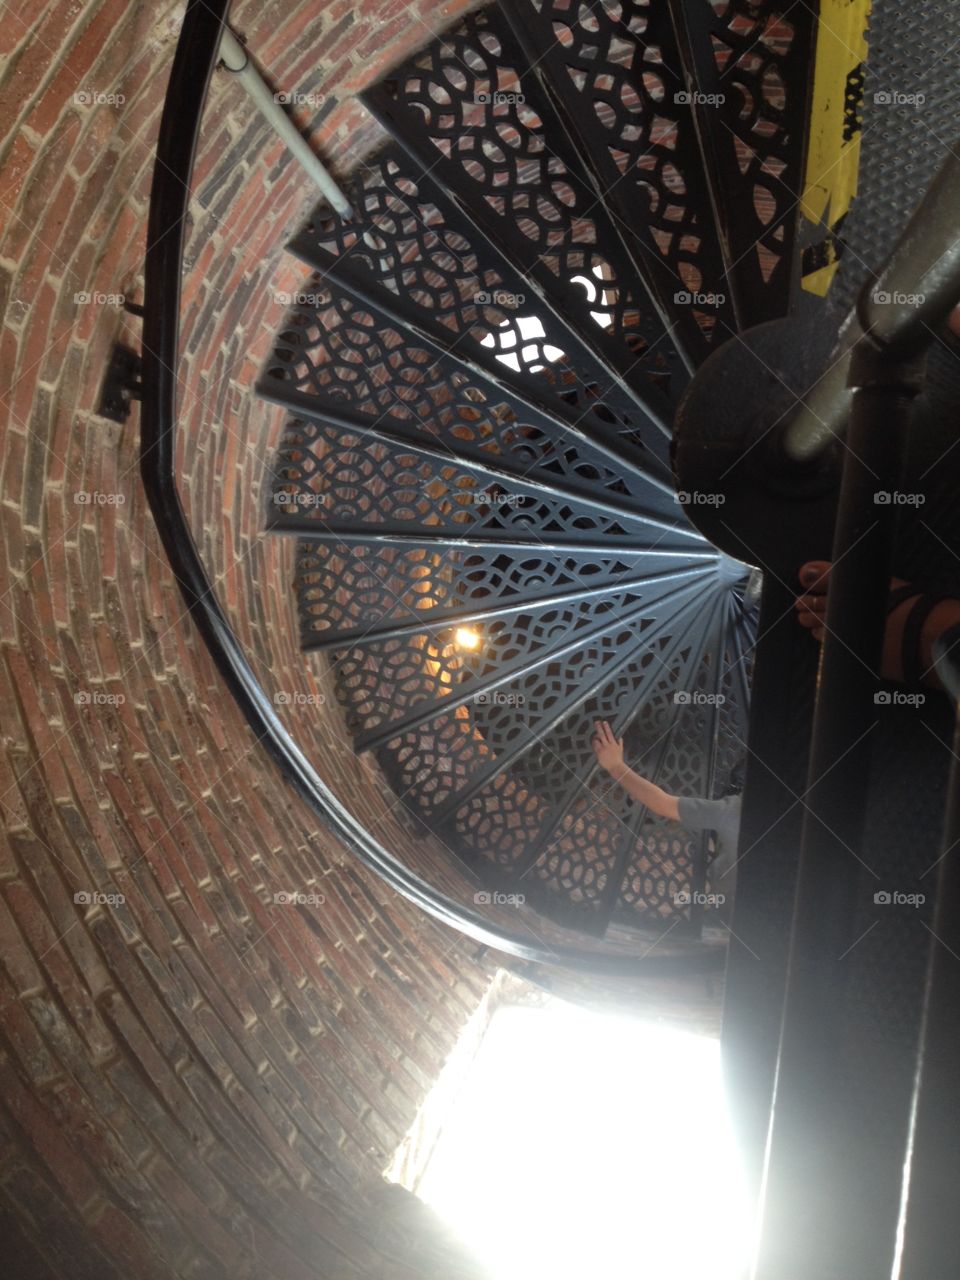 My sister took this inside a lighthouse 